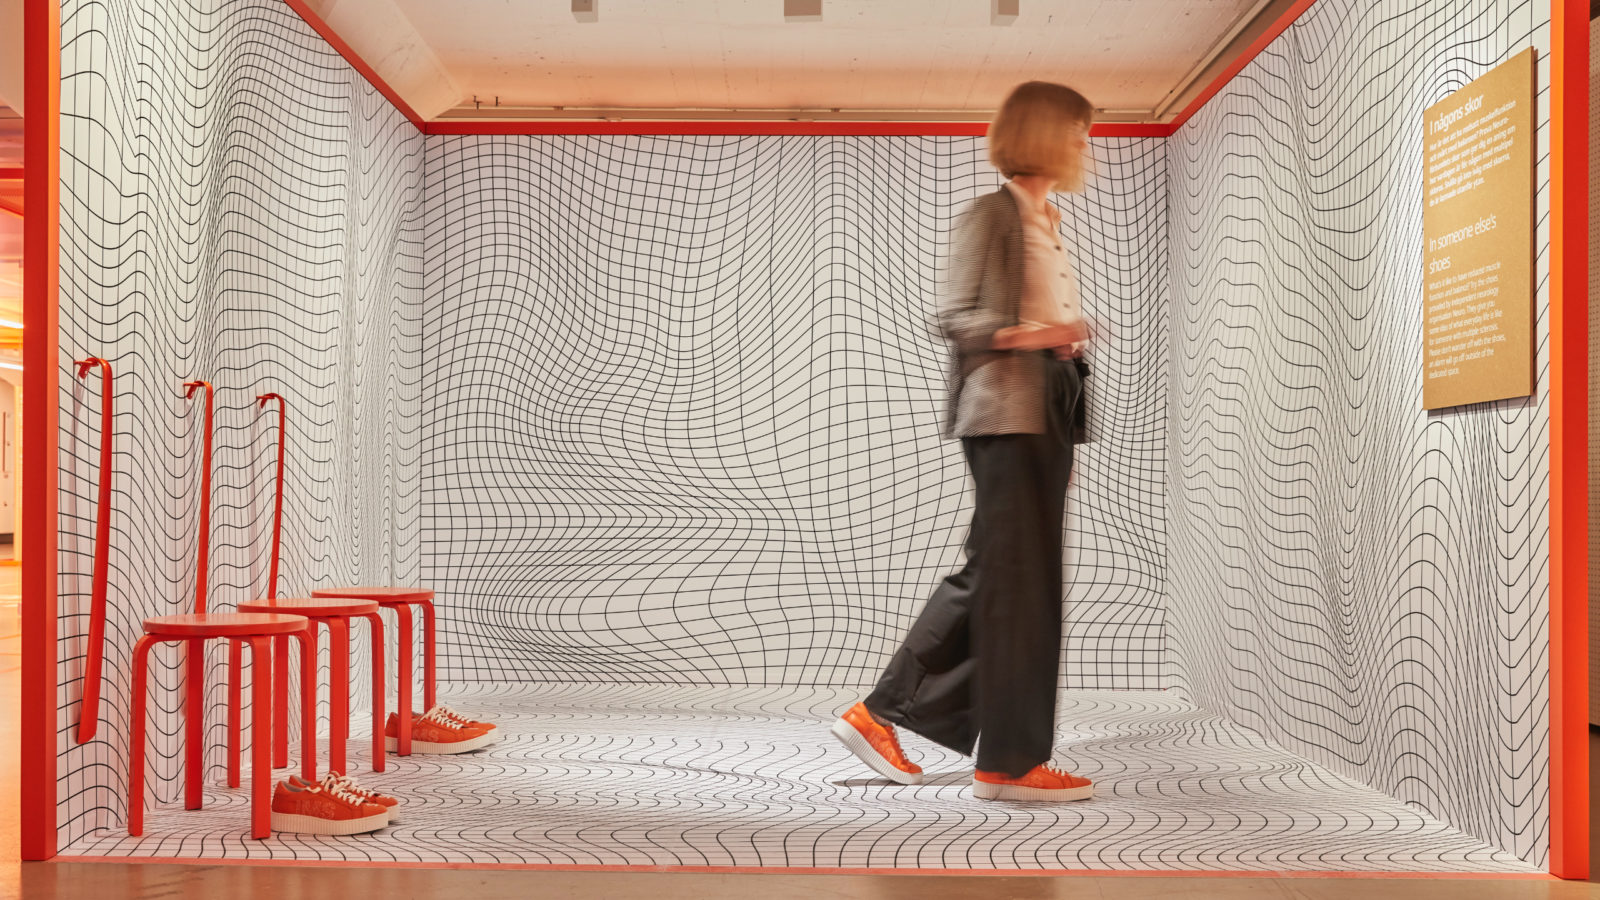 A woman inside a space covered with black and white geometrical patterns, three bright orange stools, shoes and shoe horns.